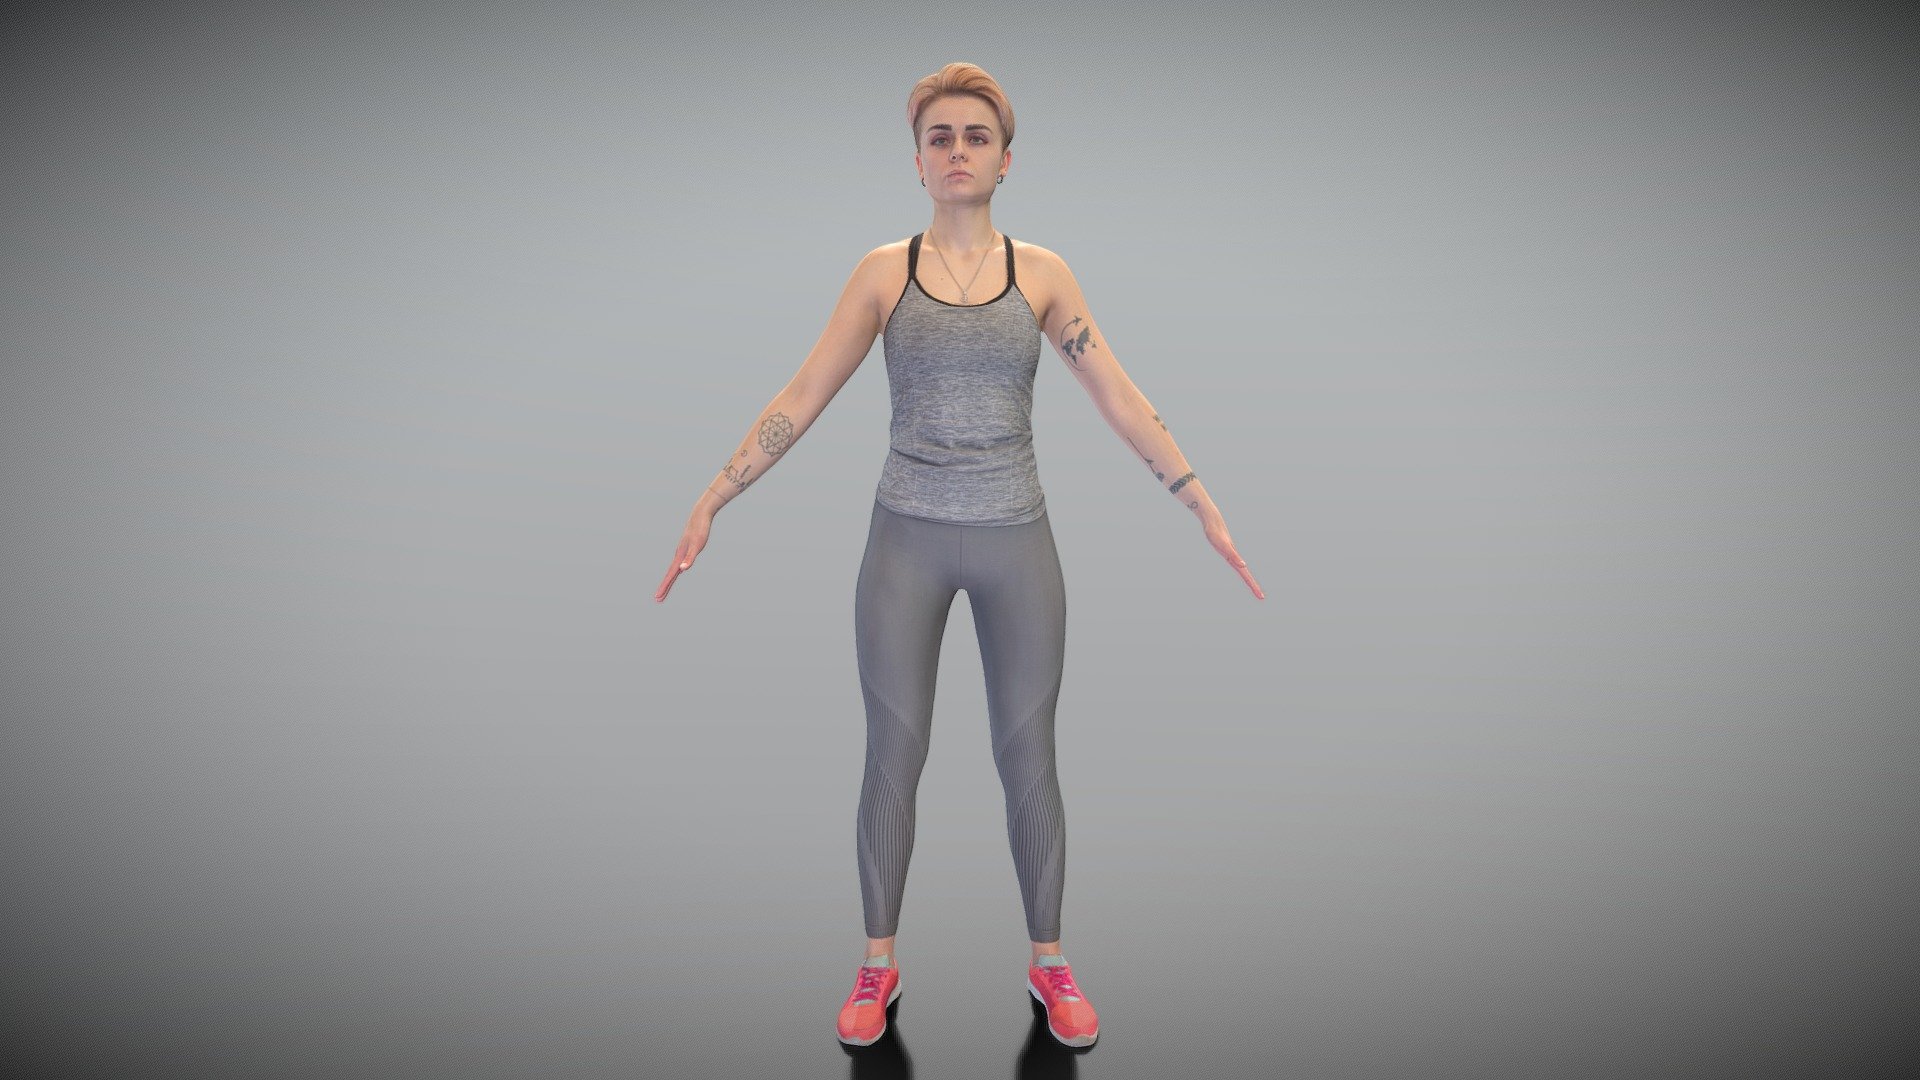 This is a true human size detailed model of a beautiful young woman of Caucasian appearance dressed in sportswear. The model is captured in the A-pose with mesh ready for rigging and animation in all most usable 3d software.

Technical specifications:




digital double scan model

low-poly model

high-poly model (.ztl tool with 5-6 subdivisions) clean and retopologized automatically via ZRemesher

fully quad topology

sufficiently clean

edge Loops based

ready for subdivision

8K texture color map

non-overlapping UV map

ready for animation

PBR textures 8K resolution: Normal, Displacement, Albedo maps

Download package includes a Cinema 4D project file with Redshift shader, OBJ, FBX, STL files, which are applicable for 3ds Max, Maya, Unreal Engine, Unity, Blender, etc. All the textures you will find in the “Tex” folder, included into the main archive.

3D EVERYTHING

Stand with Ukraine! - Sporty woman in grey outfit in A-pose 412 - Buy Royalty Free 3D model by deep3dstudio 3d model